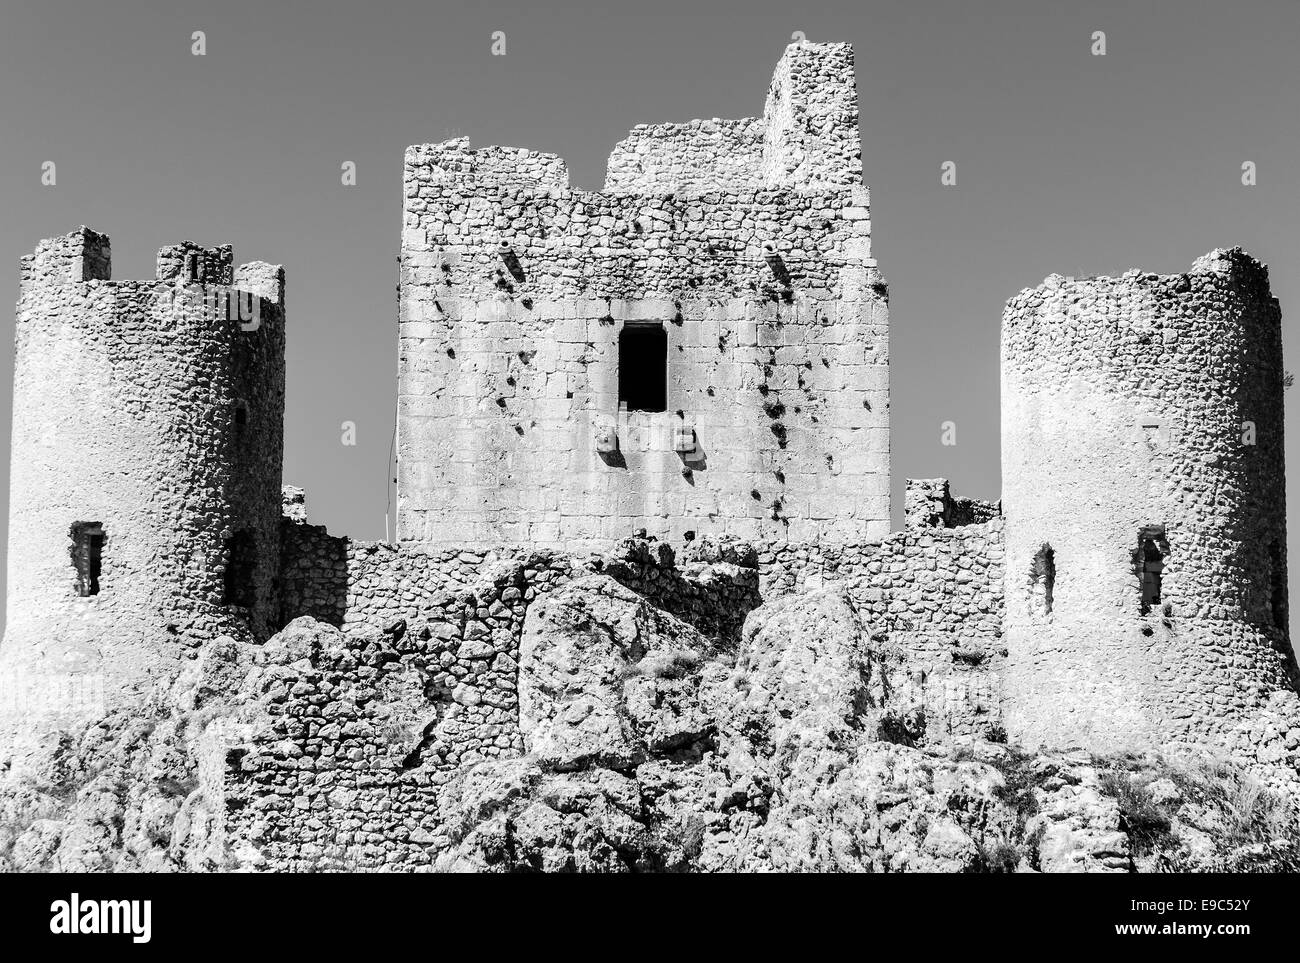 The fantastic 'Rocca Calascio' castle one of the highest castles in Italy  located in the National Park of Gran Sasso. Stock Photo